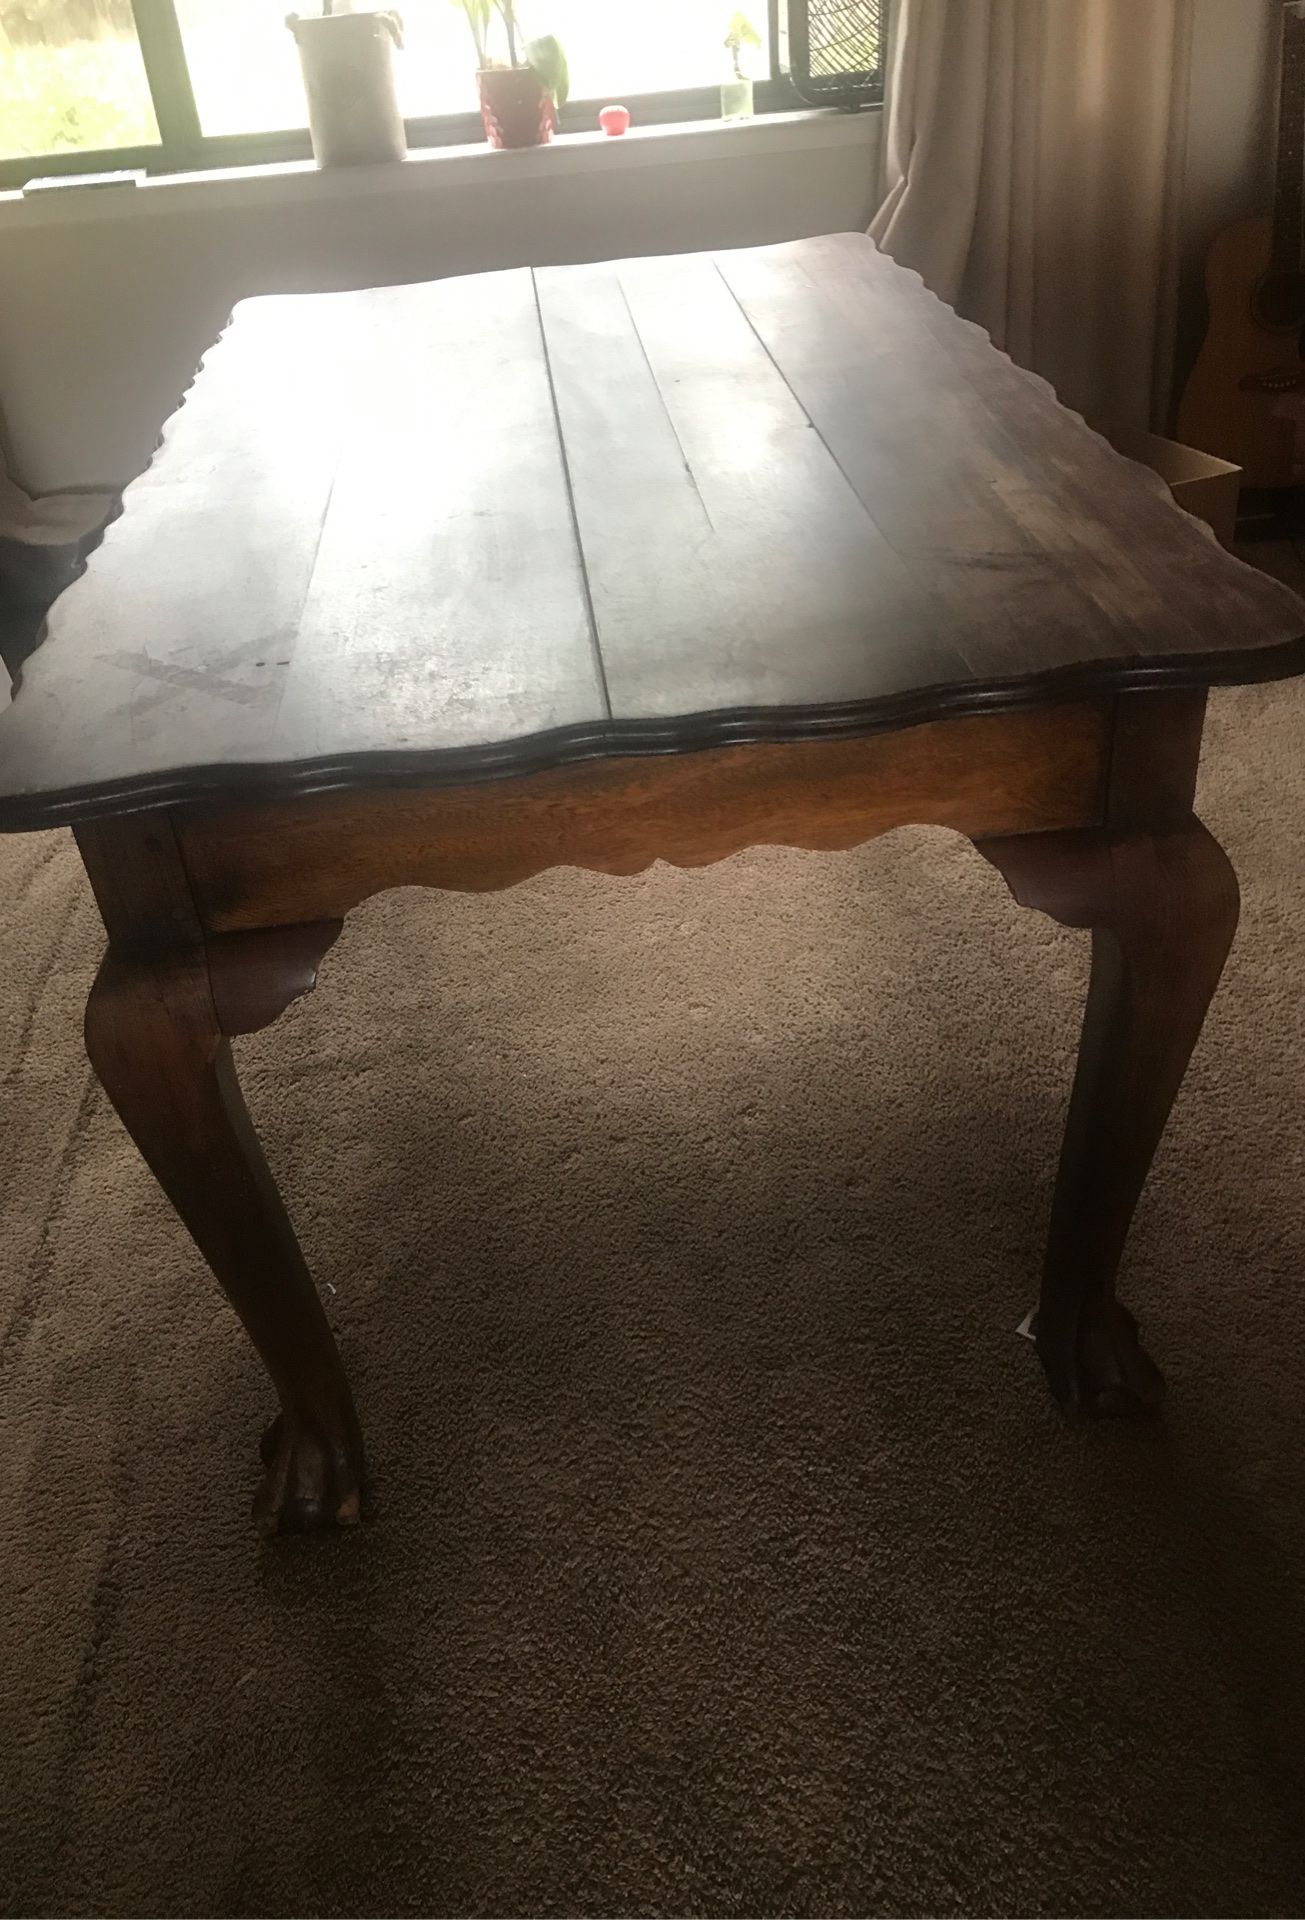 Ornate Maple wood kitchen or dining table